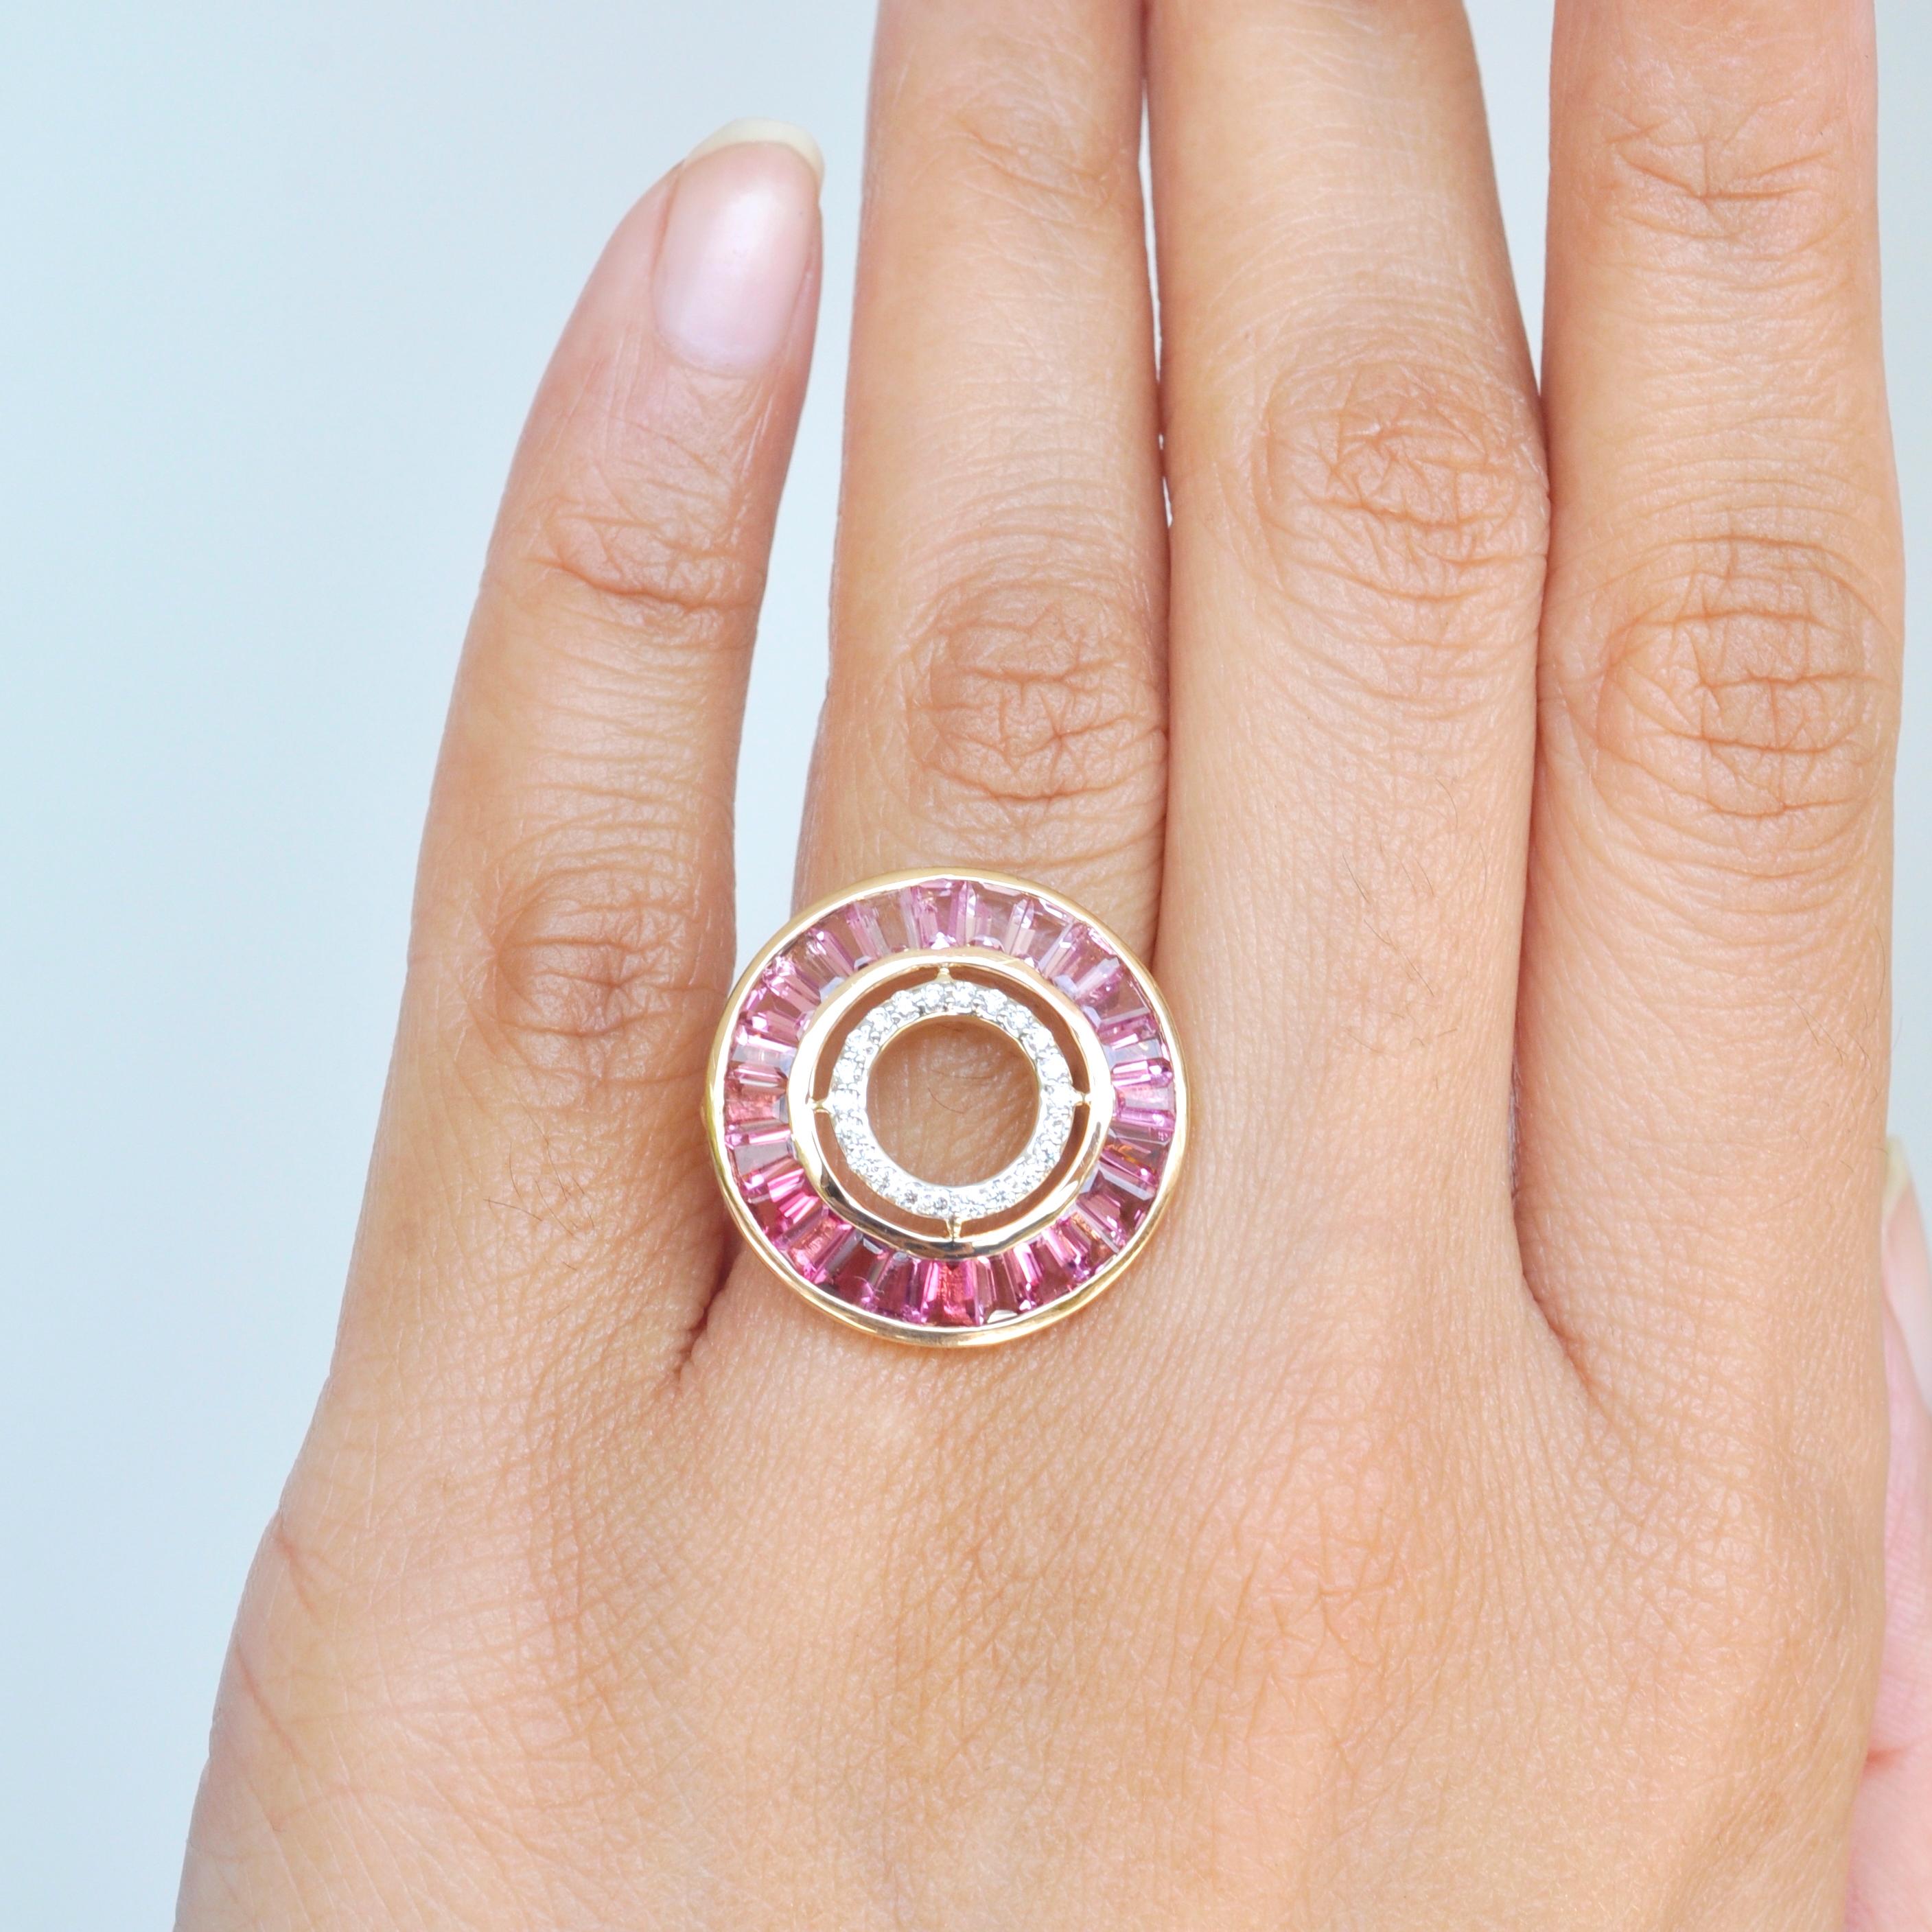 18 karat gold custom cut pink tourmaline baguette diamond art deco circular ring.

Art Deco Style, color and culture all come together to inspire this beautiful 18 karat gold taper baguette cut pink tourmaline diamond circular ring, where sumptuous